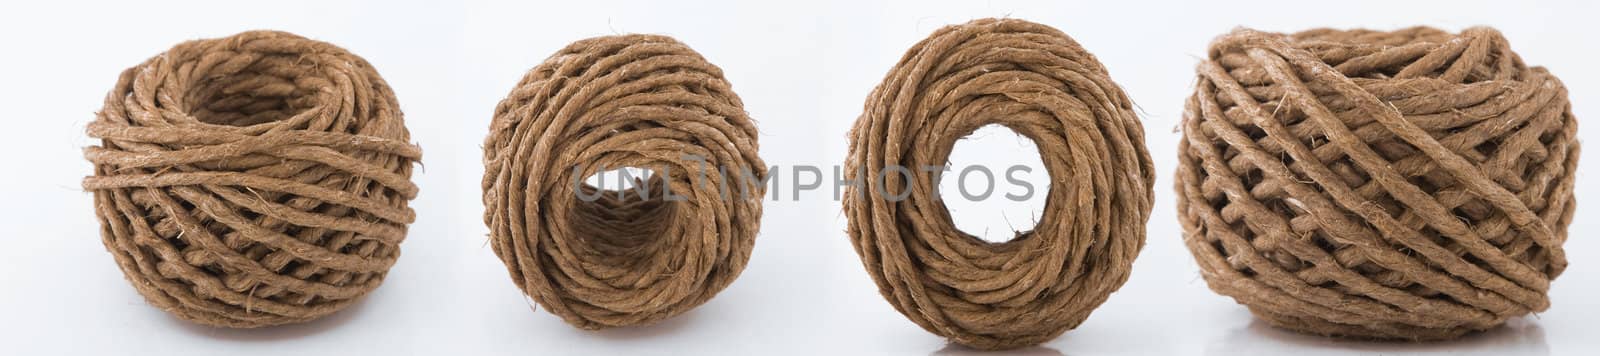 ball of twine seen different points of view